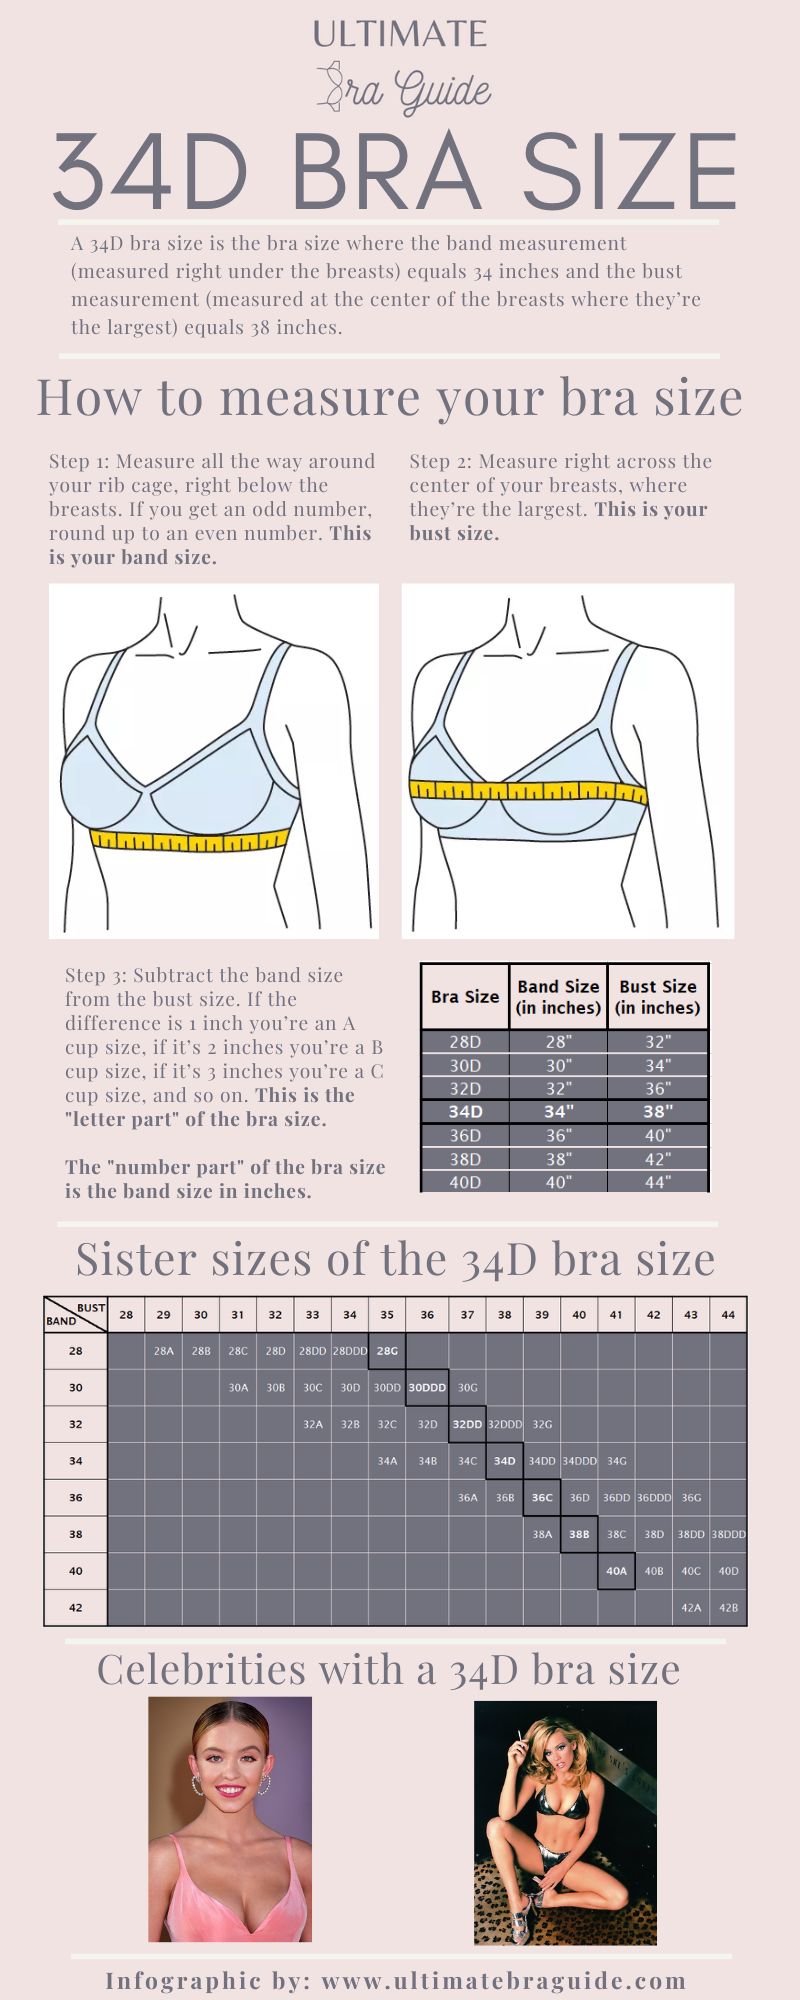 An infographic all about the 34D bra size - what it is, how to measure if you're 34D bra size, 34D bra sister sizes, 34D cup examples, and so on